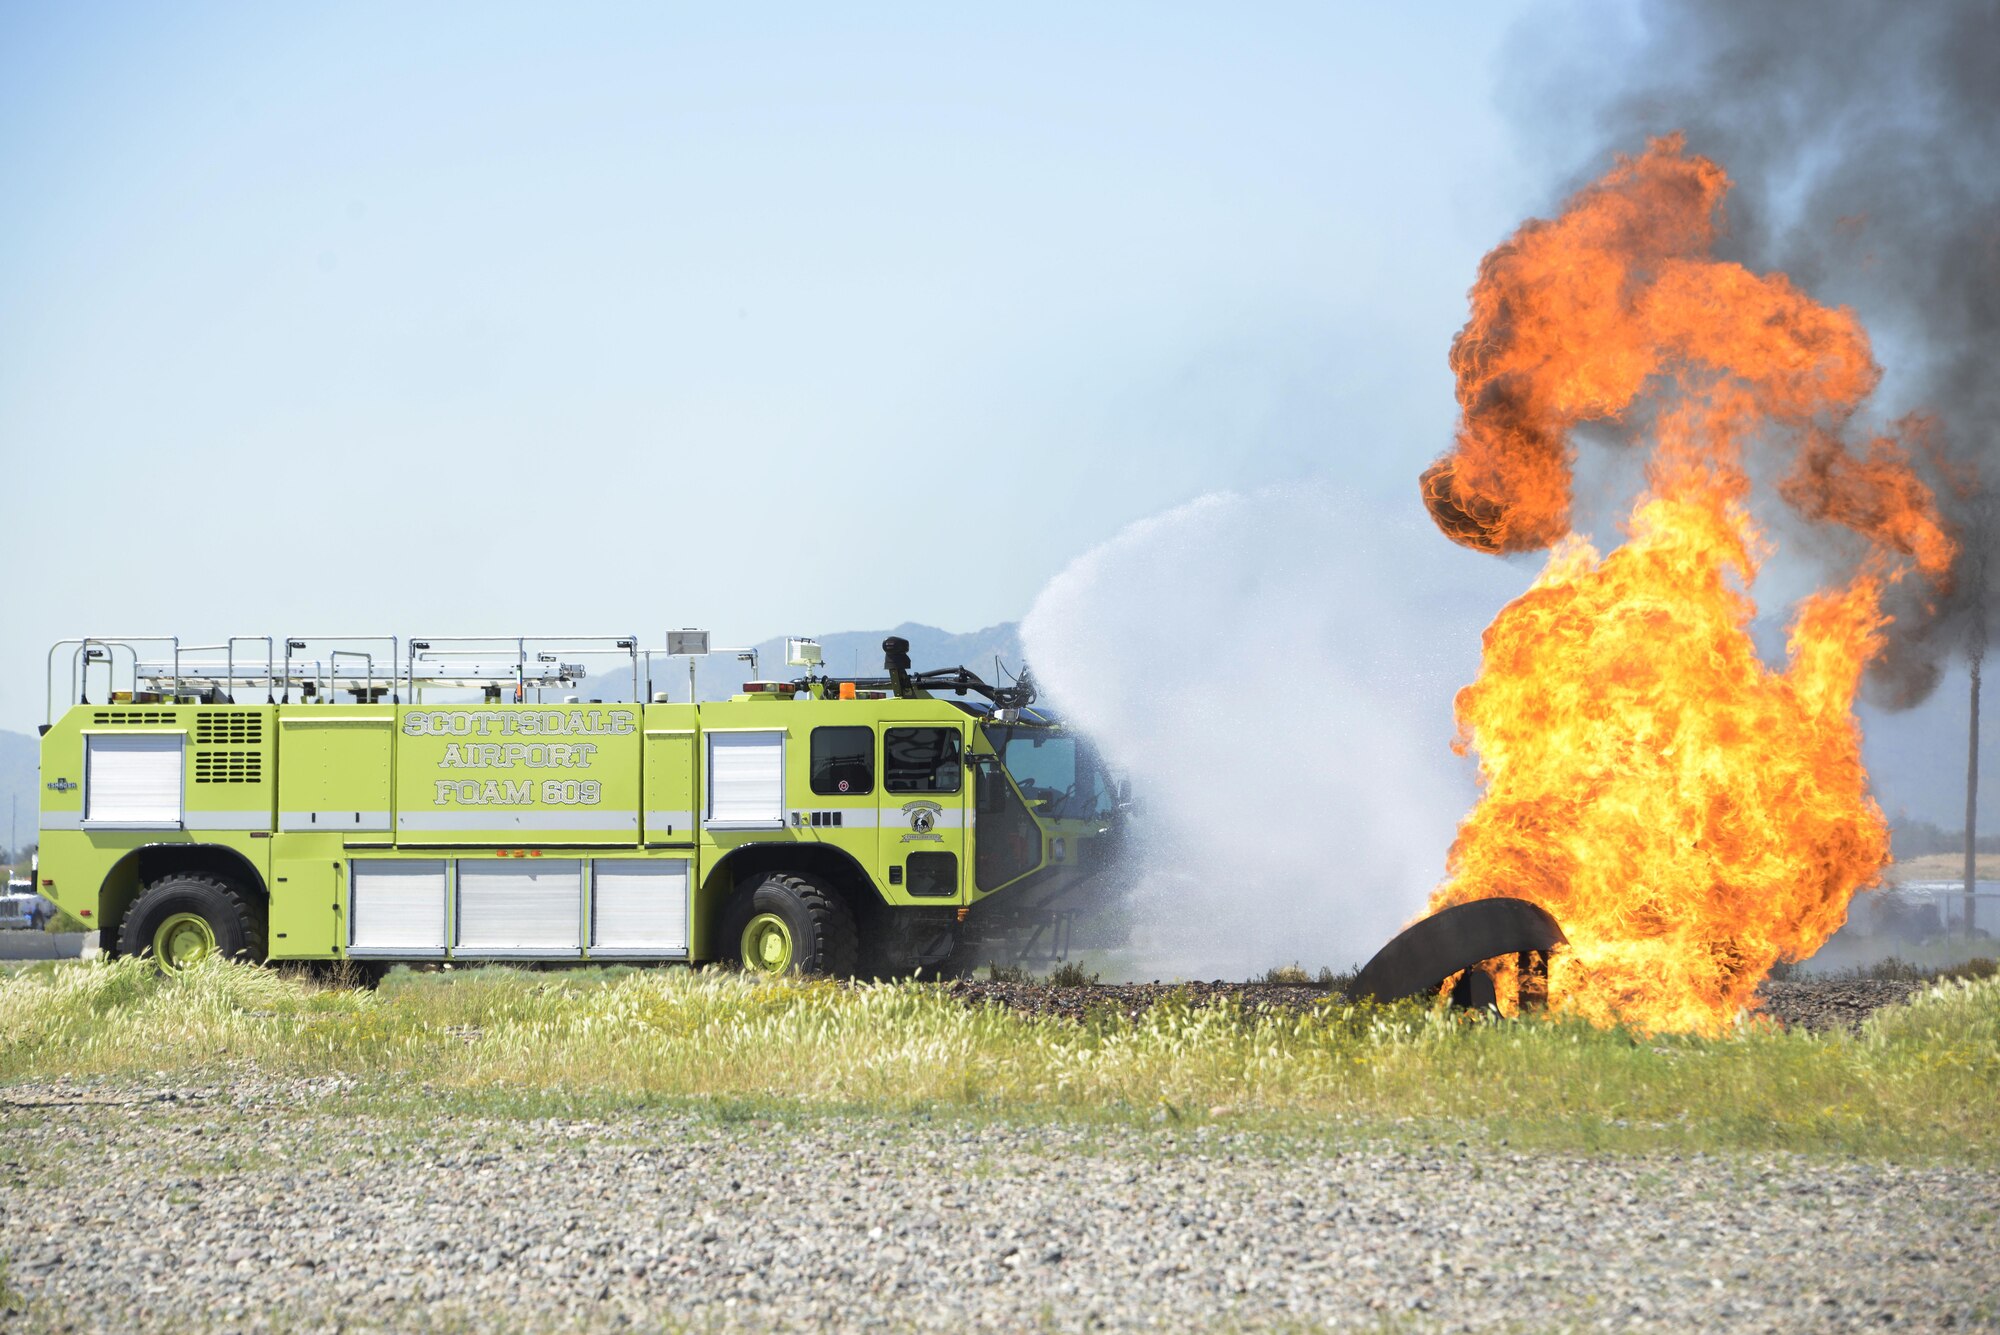 The Scottsdale Fire Department use a rapid intervention vehicle to respond to a simulated aircraft fire during training with Luke firefighters Mar. 16, 2017 at Luke Air Force Base, Ariz. The firefighters were training on stabilizing an aircraft fire using RIVs. (U.S. Air Force photo by Senior Airman Devante Williams)  